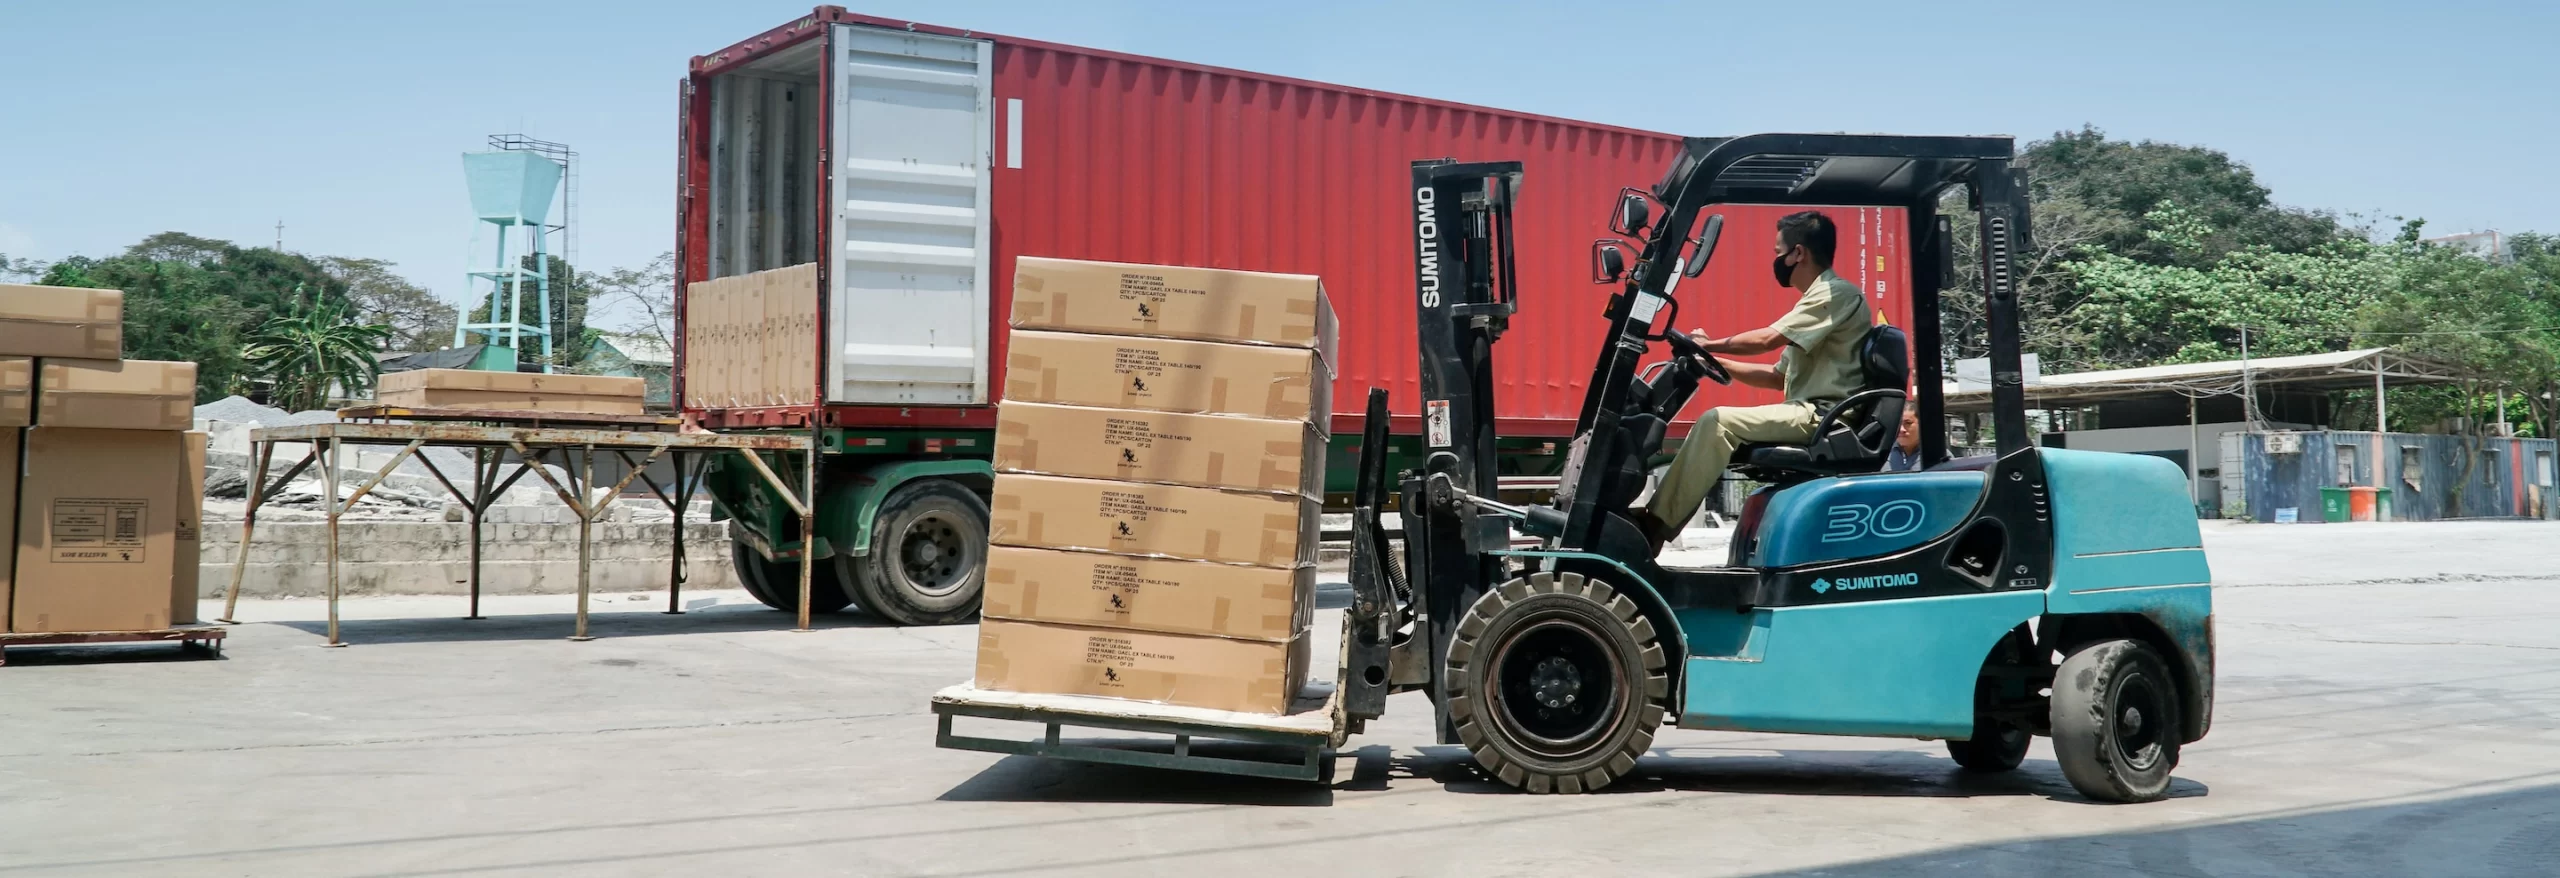 A forklift truck is transporting cargo in a warehouse.